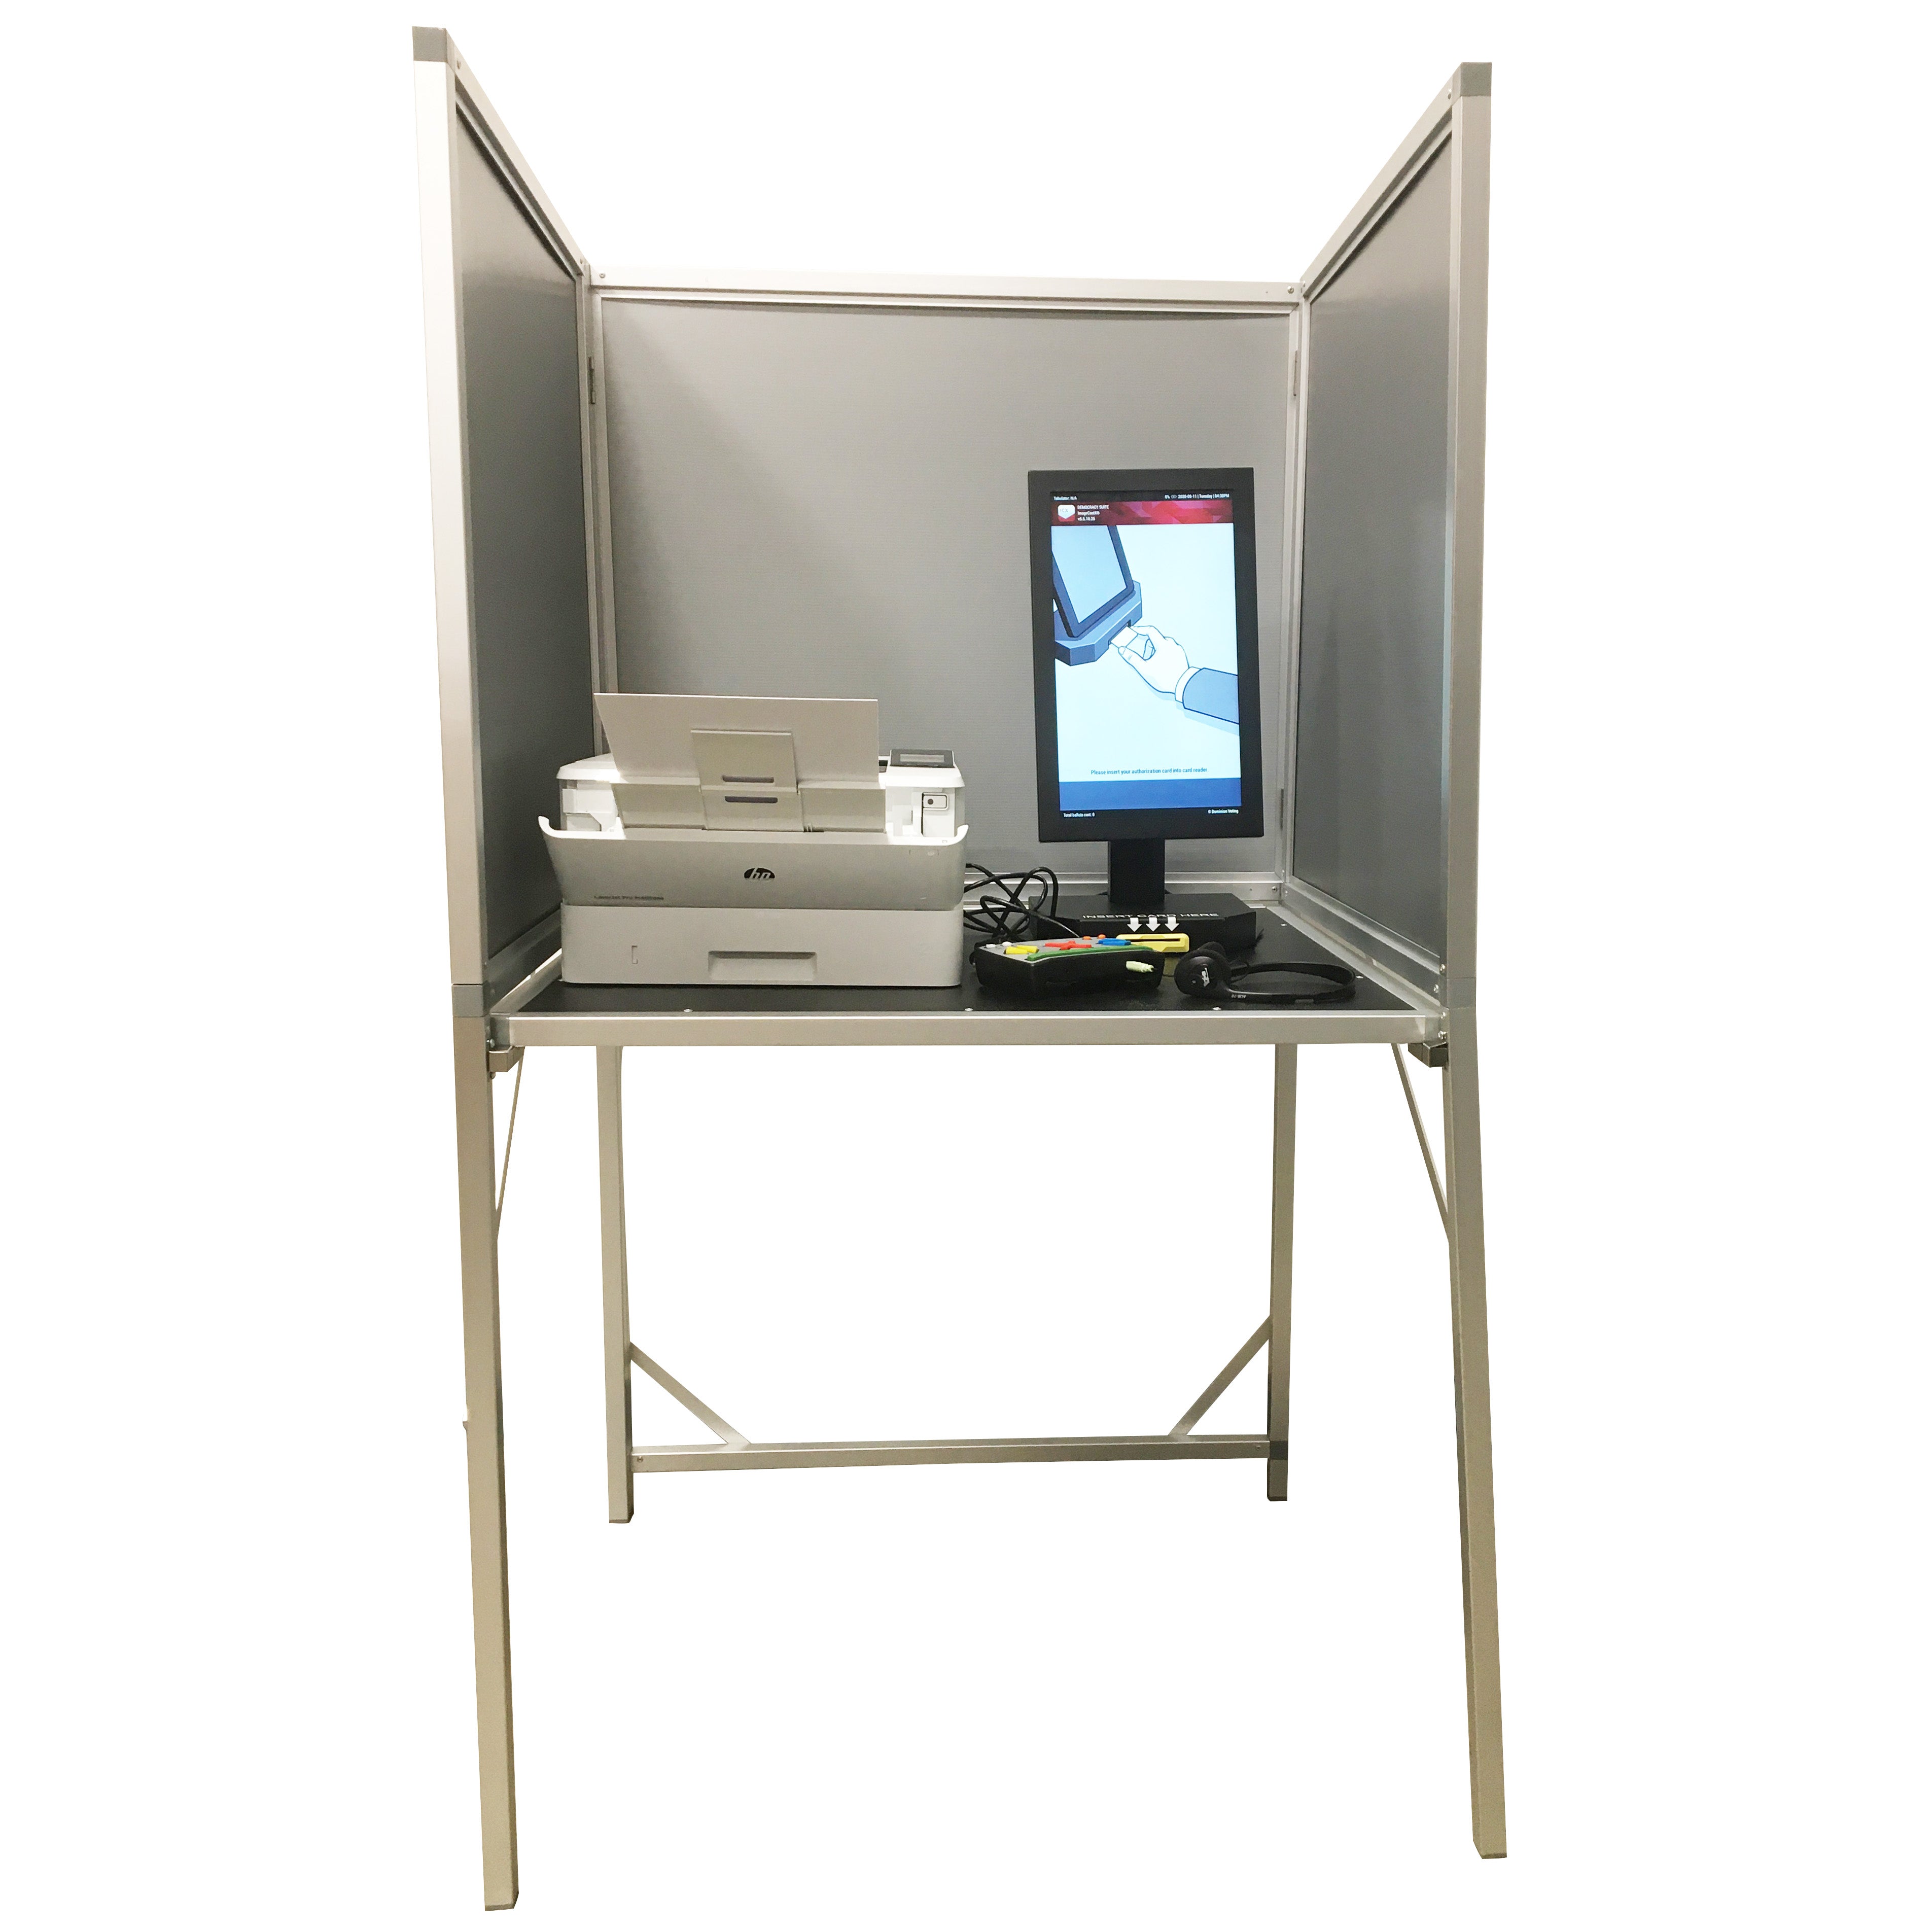 Select ICX Voting Booth